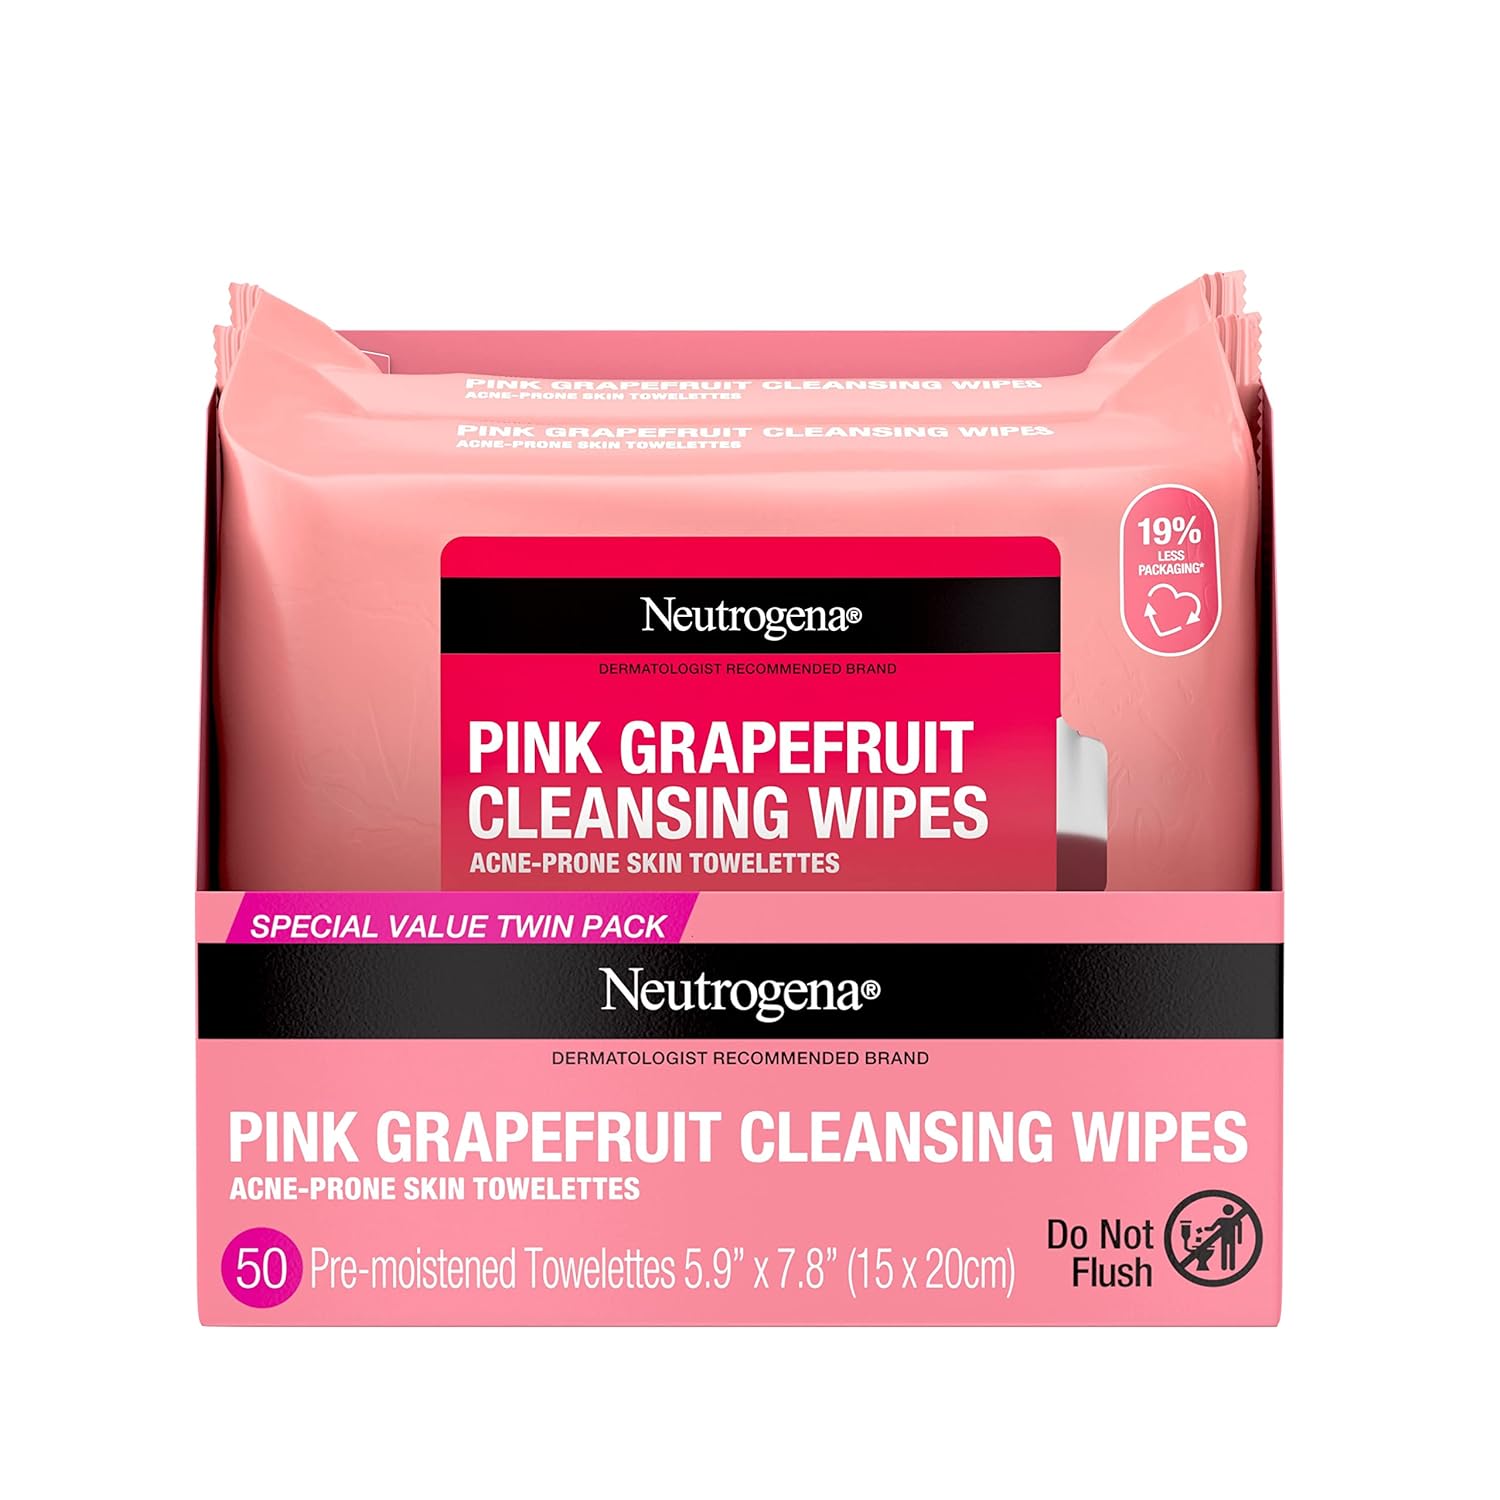 Neutrogena Oil Free Facial Cleansing Makeup Wipes with Pink Grapefruit, Disposable Acne Face Towelettes to Remove Dirt, Oil, and Makeup for Acne Prone Skin